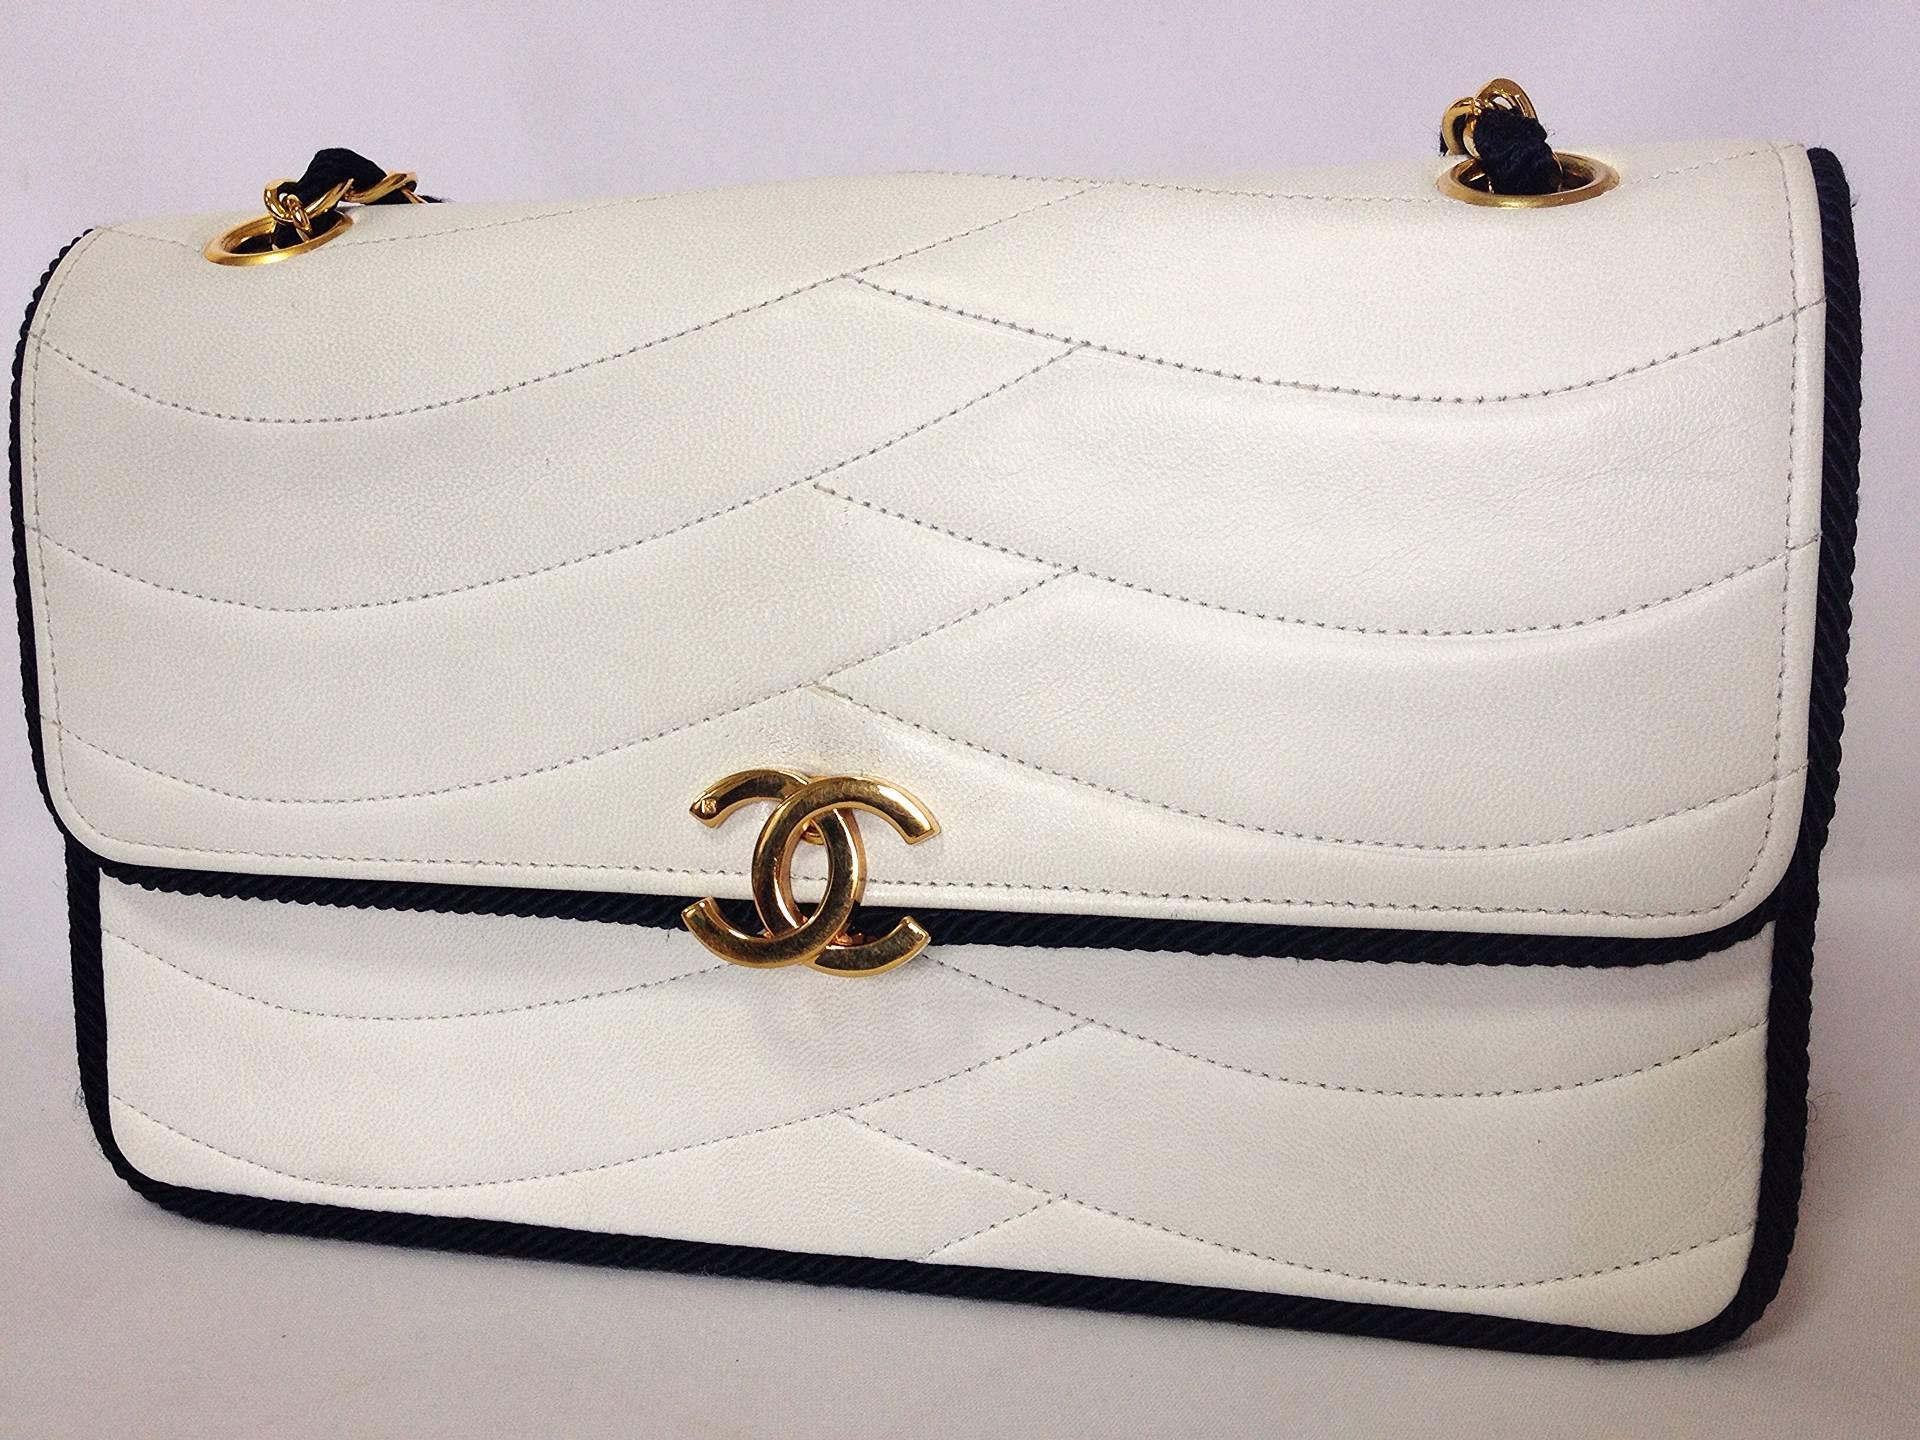 MINT. 80's rare vintage Chanel white flap bag with navy rope string and gold chains. Very rare purse from the era.

This is a very rare vintage CHANEL white lambskin purse with the navy rope strap in the 80's.
Featuring the zipper by ECLAIR,